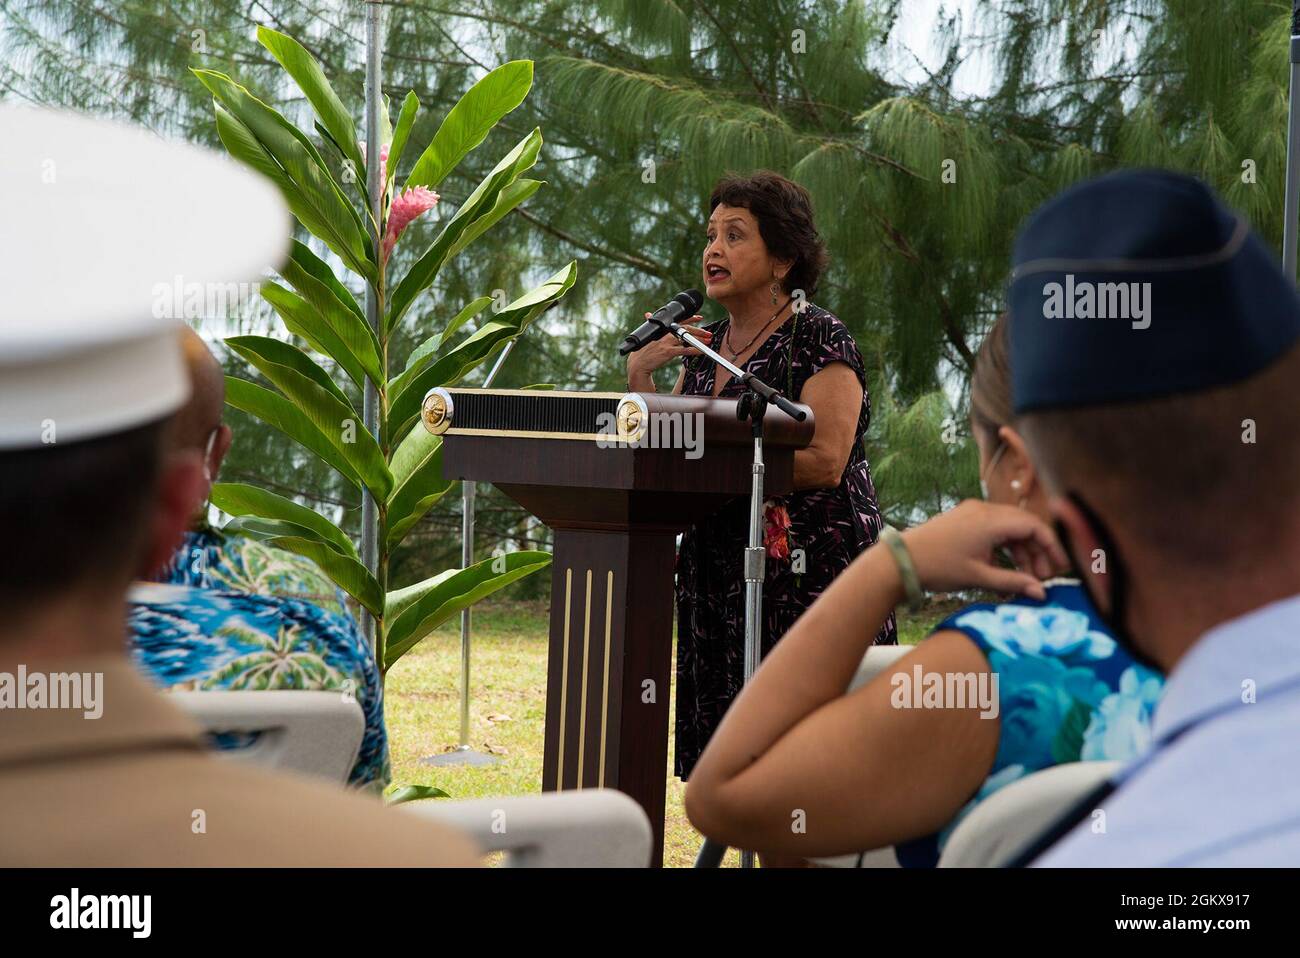 ASAN, Guam (July 19, 2021) - Governor of Guam Lourdes Leon Guerrero offers remarks during the Asan Beach Landing Memorial ceremony July 16. Military service members, local government officials and residents gathered to recall the U.S. military’s liberation of Guam during World War II. The site of the ceremony is where the 3rd Marine Division planted the U.S. flag after securing the beachhead. Approximately 55,000 Marines and Army soldiers participated in the battle for Guam. More than 1,800 American service members were killed in action or died of wounds during the first 21 days of combat. Stock Photo